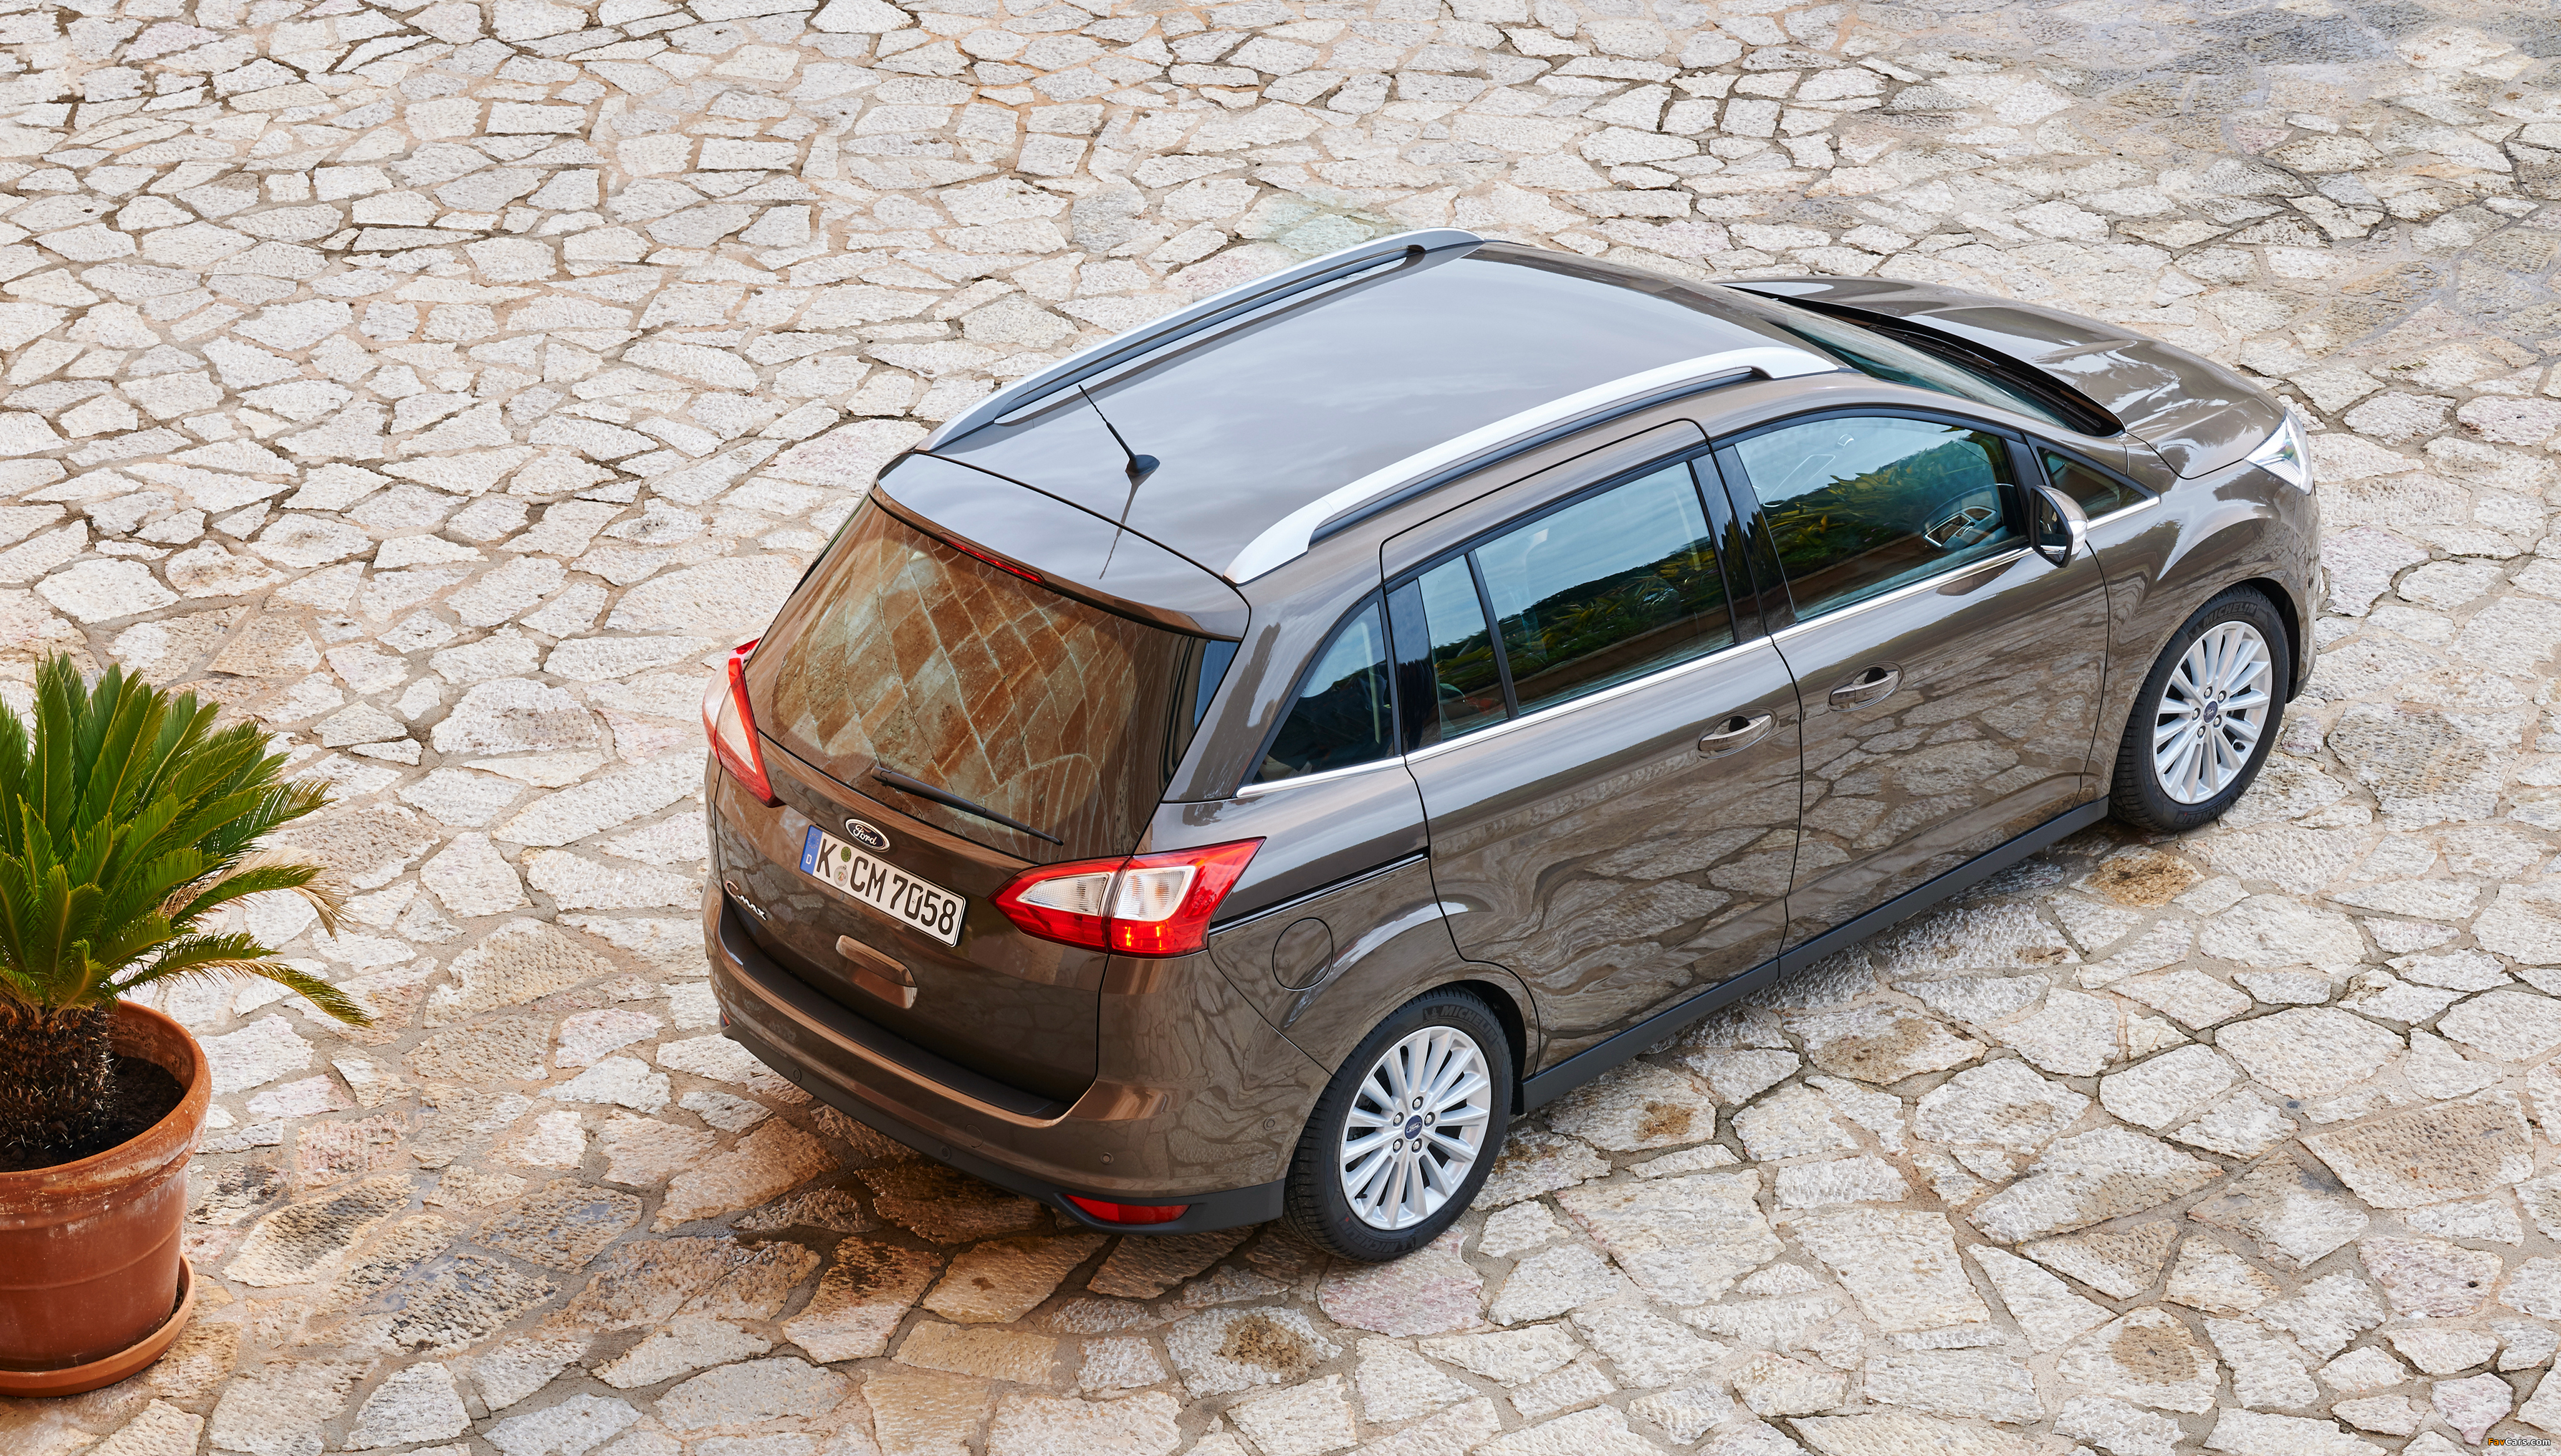 Ford Grand C-MAX 2015 images (4096 x 2329)